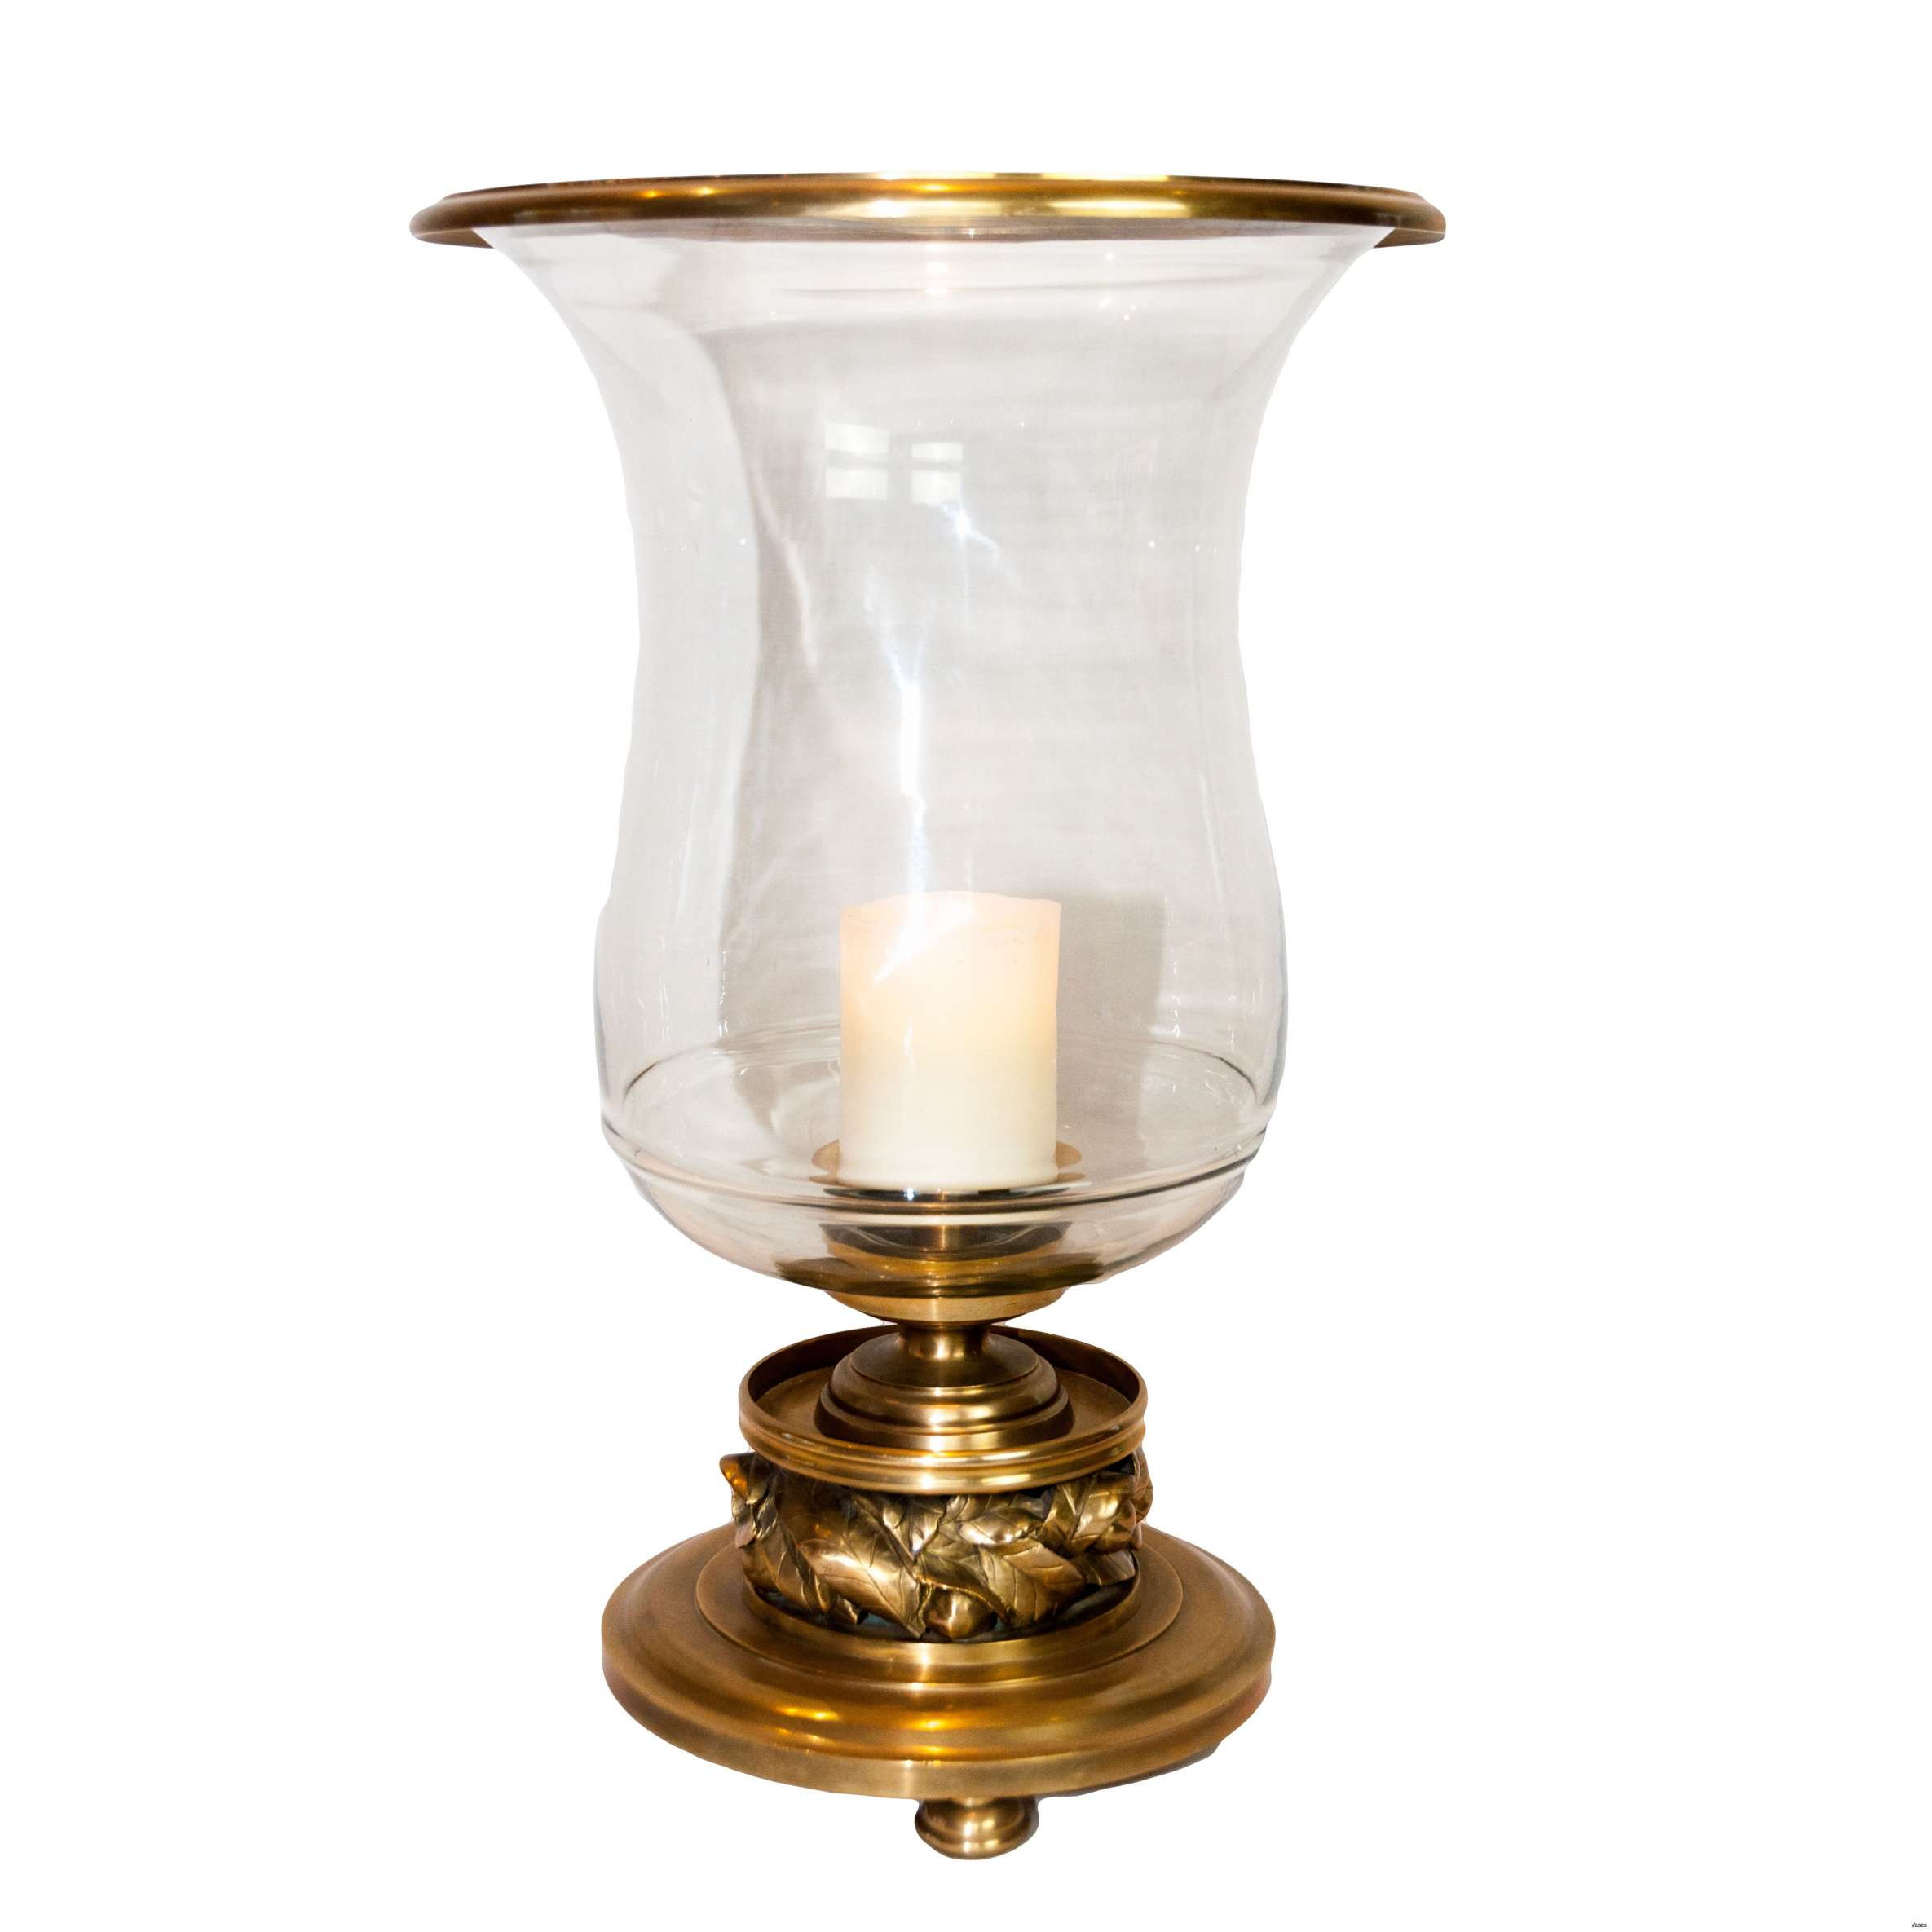 29 Fabulous Antique orange Glass Vase 2024 free download antique orange glass vase of 42 graphics vintage glass lamp shades www sabordemexicogrill com page in antique brass floor lamp beautiful ao3 210h vases hurricane lamp vase fyvie brass square